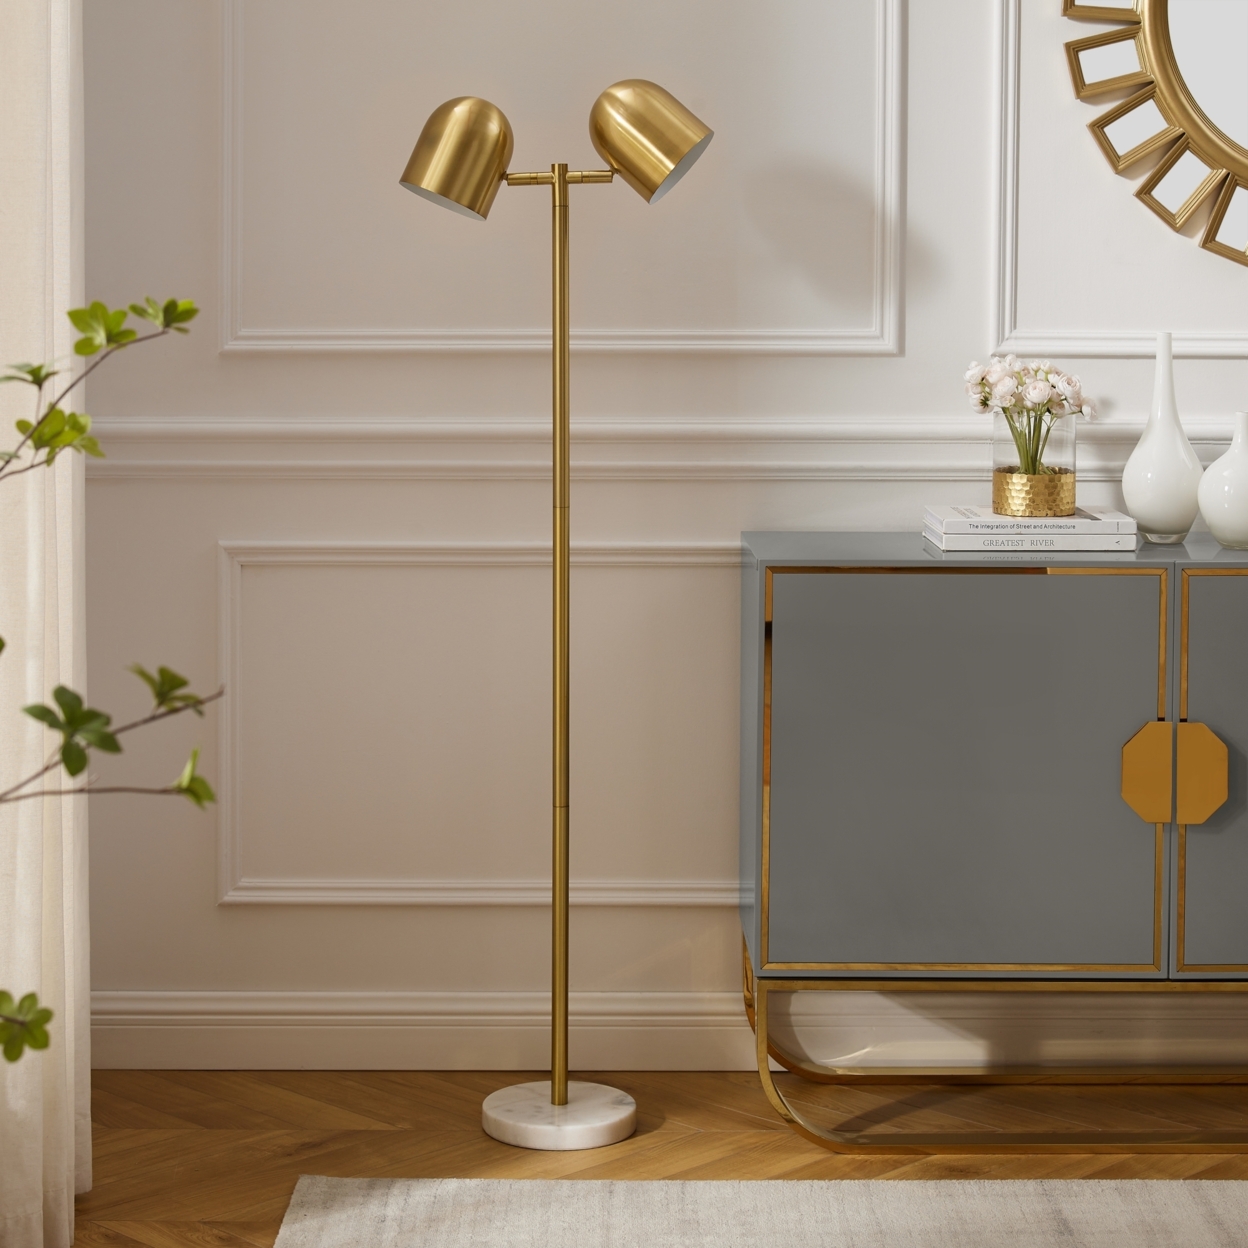 Paetyn Floor Lamp - 6ft Power Cord, Foot Switch, 2 Lights , Sturdy Metal Frame , Heavy Marble Stone Base - Brass